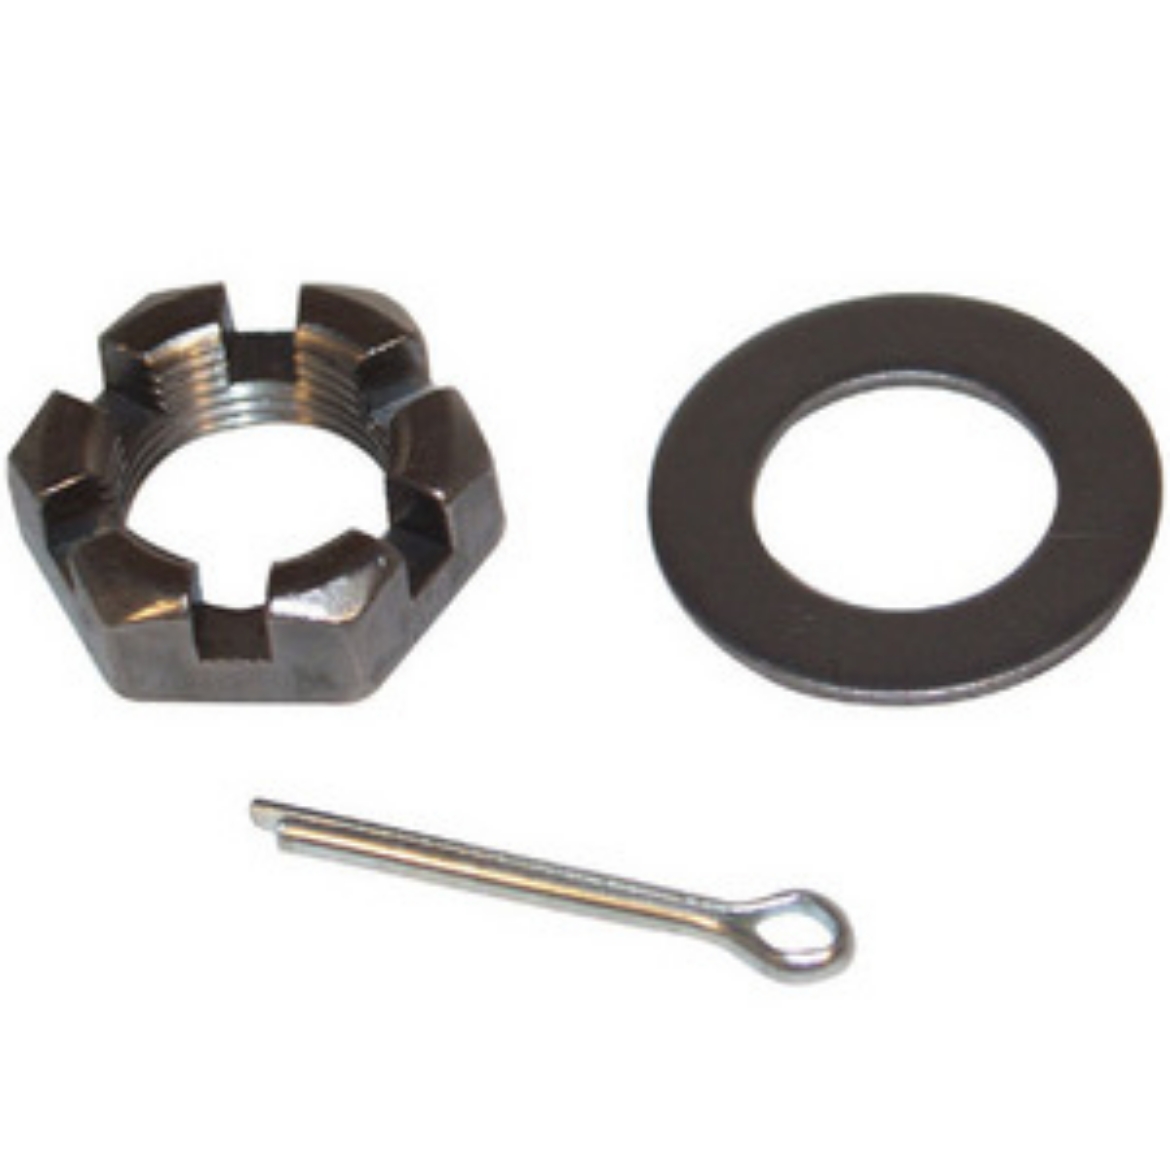 Picture of 3T 1-1/4" AXLE  NUT KIT
(Kit Includes 190020, 190008, 190006)